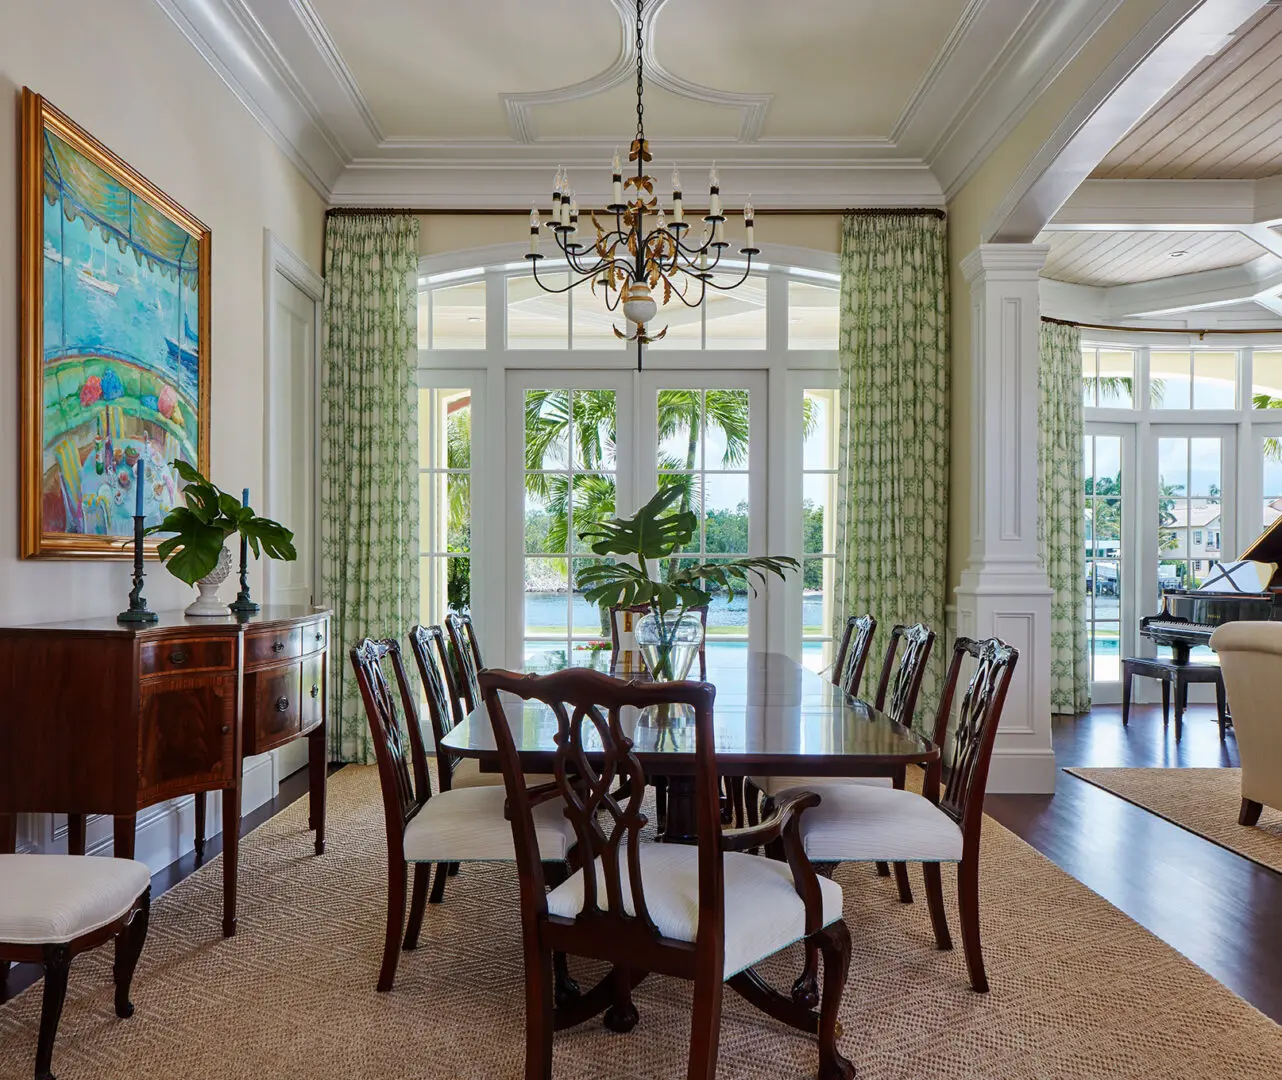 A dining room with a table and chairs, and a chandelier.